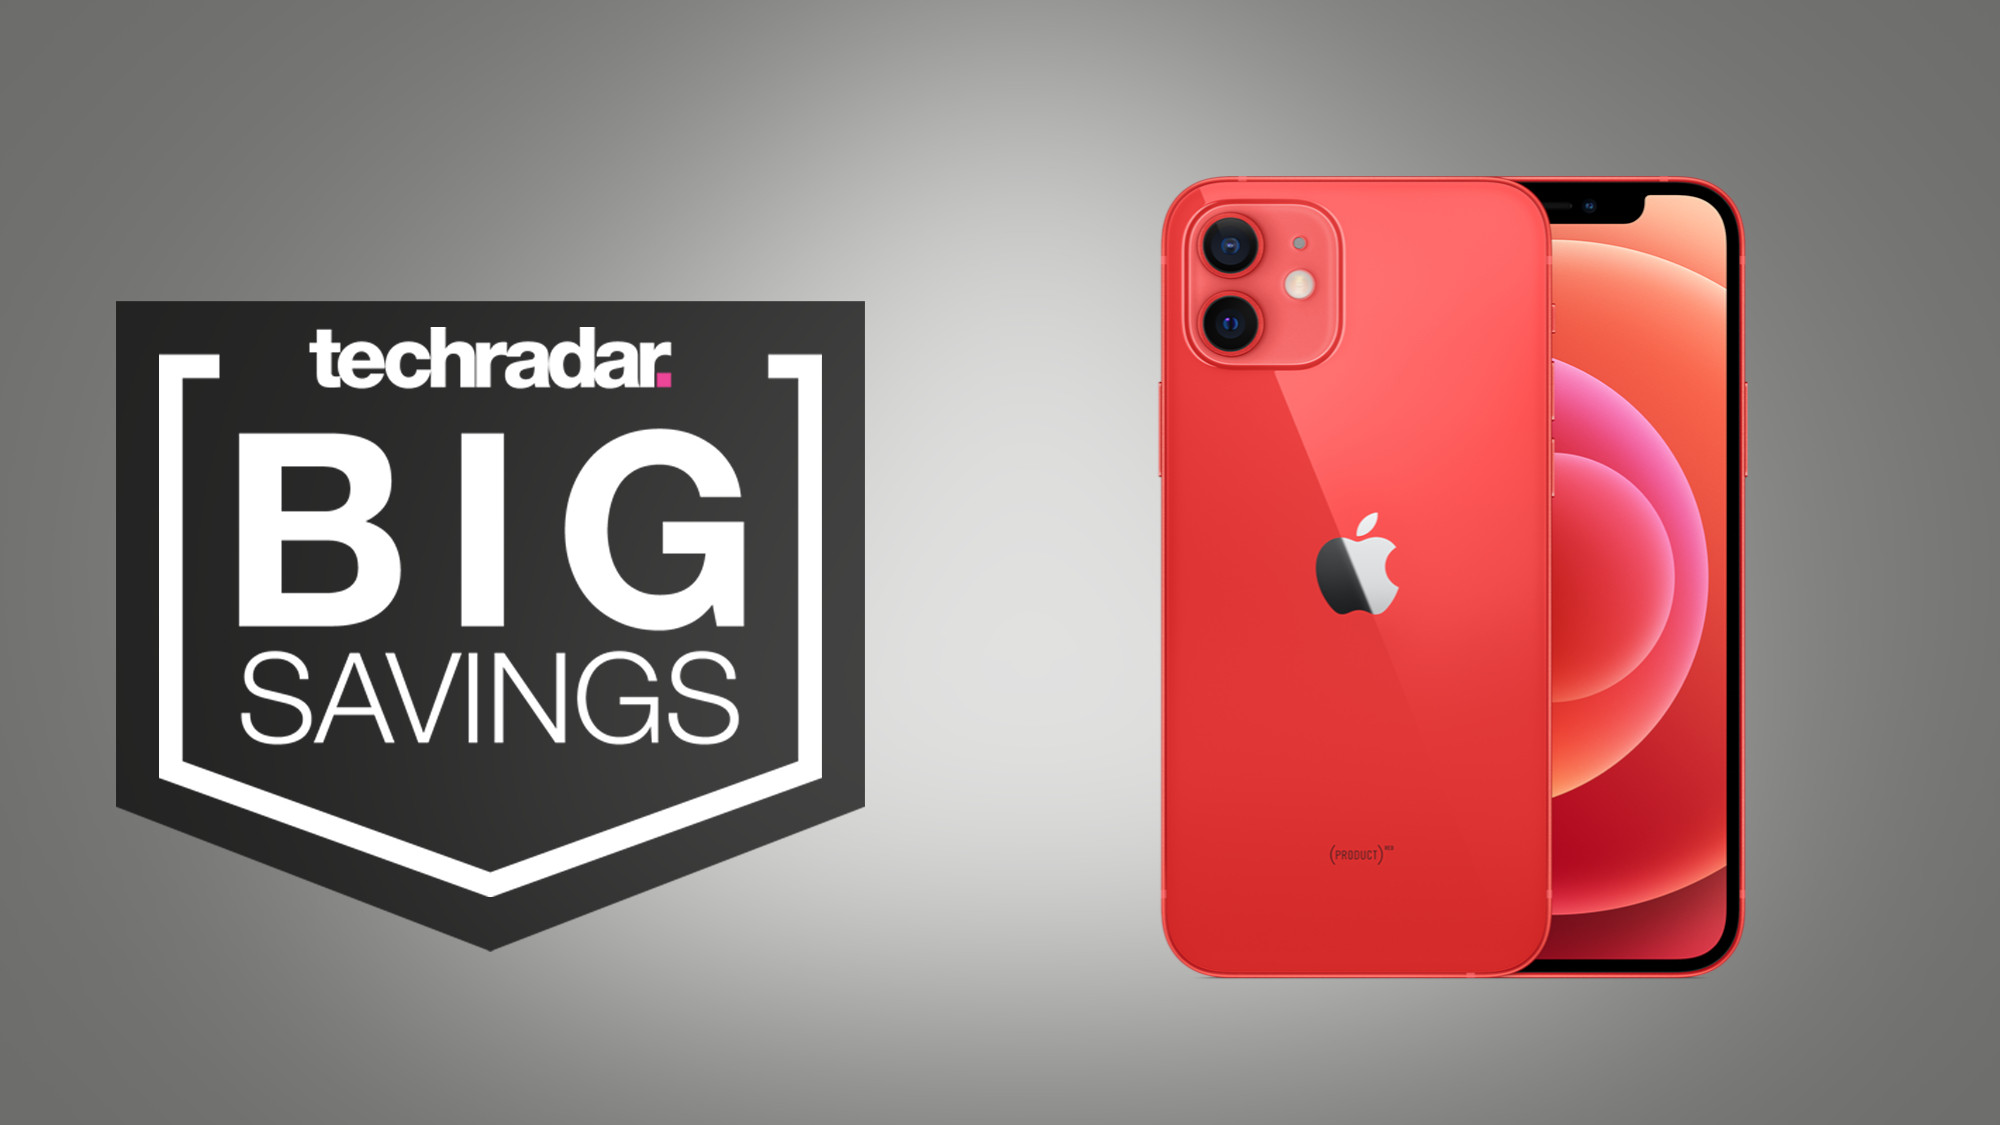 Today's best iPhone deal at Verizon isn't the iPhone 13 it's the